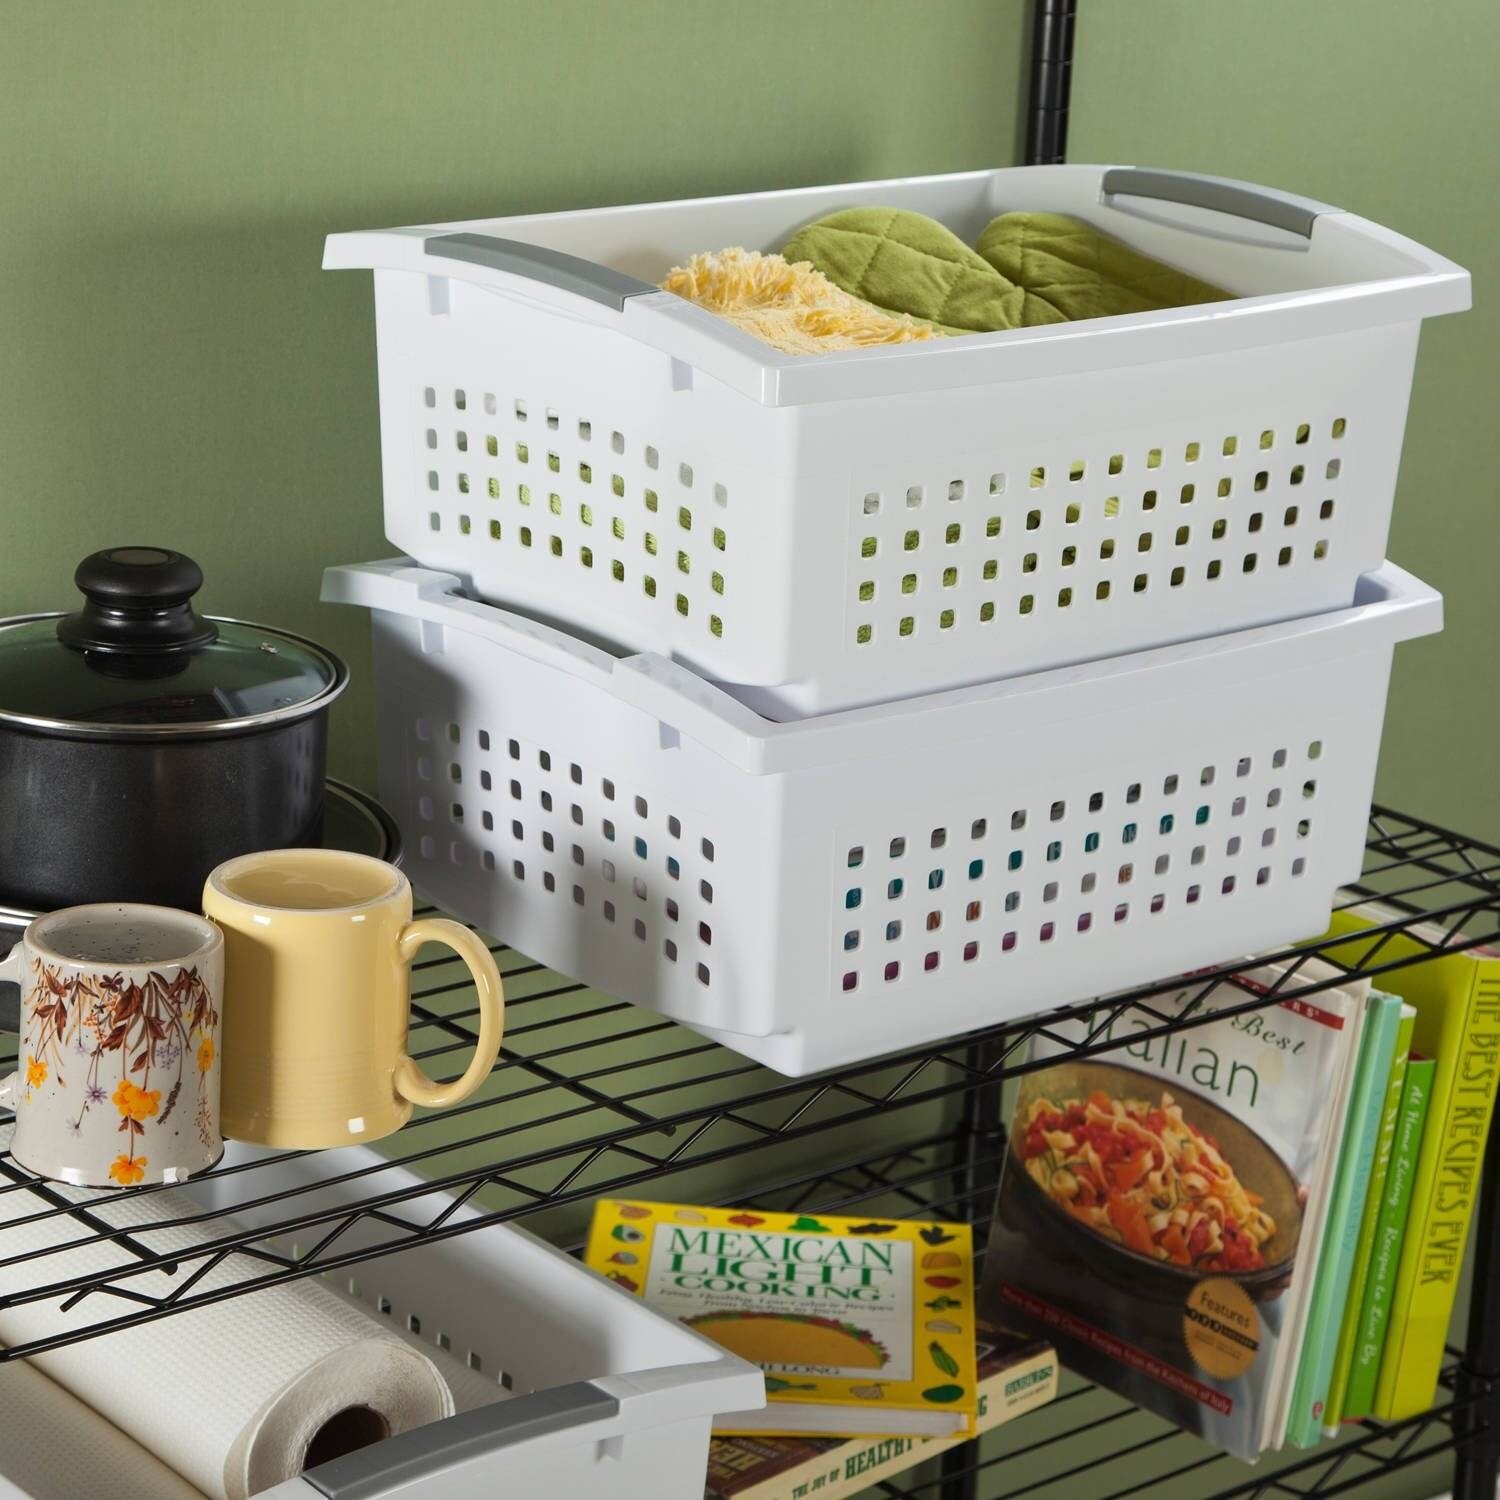 https://ak1.ostkcdn.com/images/products/is/images/direct/4fb333b9939e5fd72931ebbaf1af675c349dbabe/Sterilite-Small-Stacking-Storage-Basket-with-Comfort-Grip-Handles%2C-White%2C-8-Pack.jpg